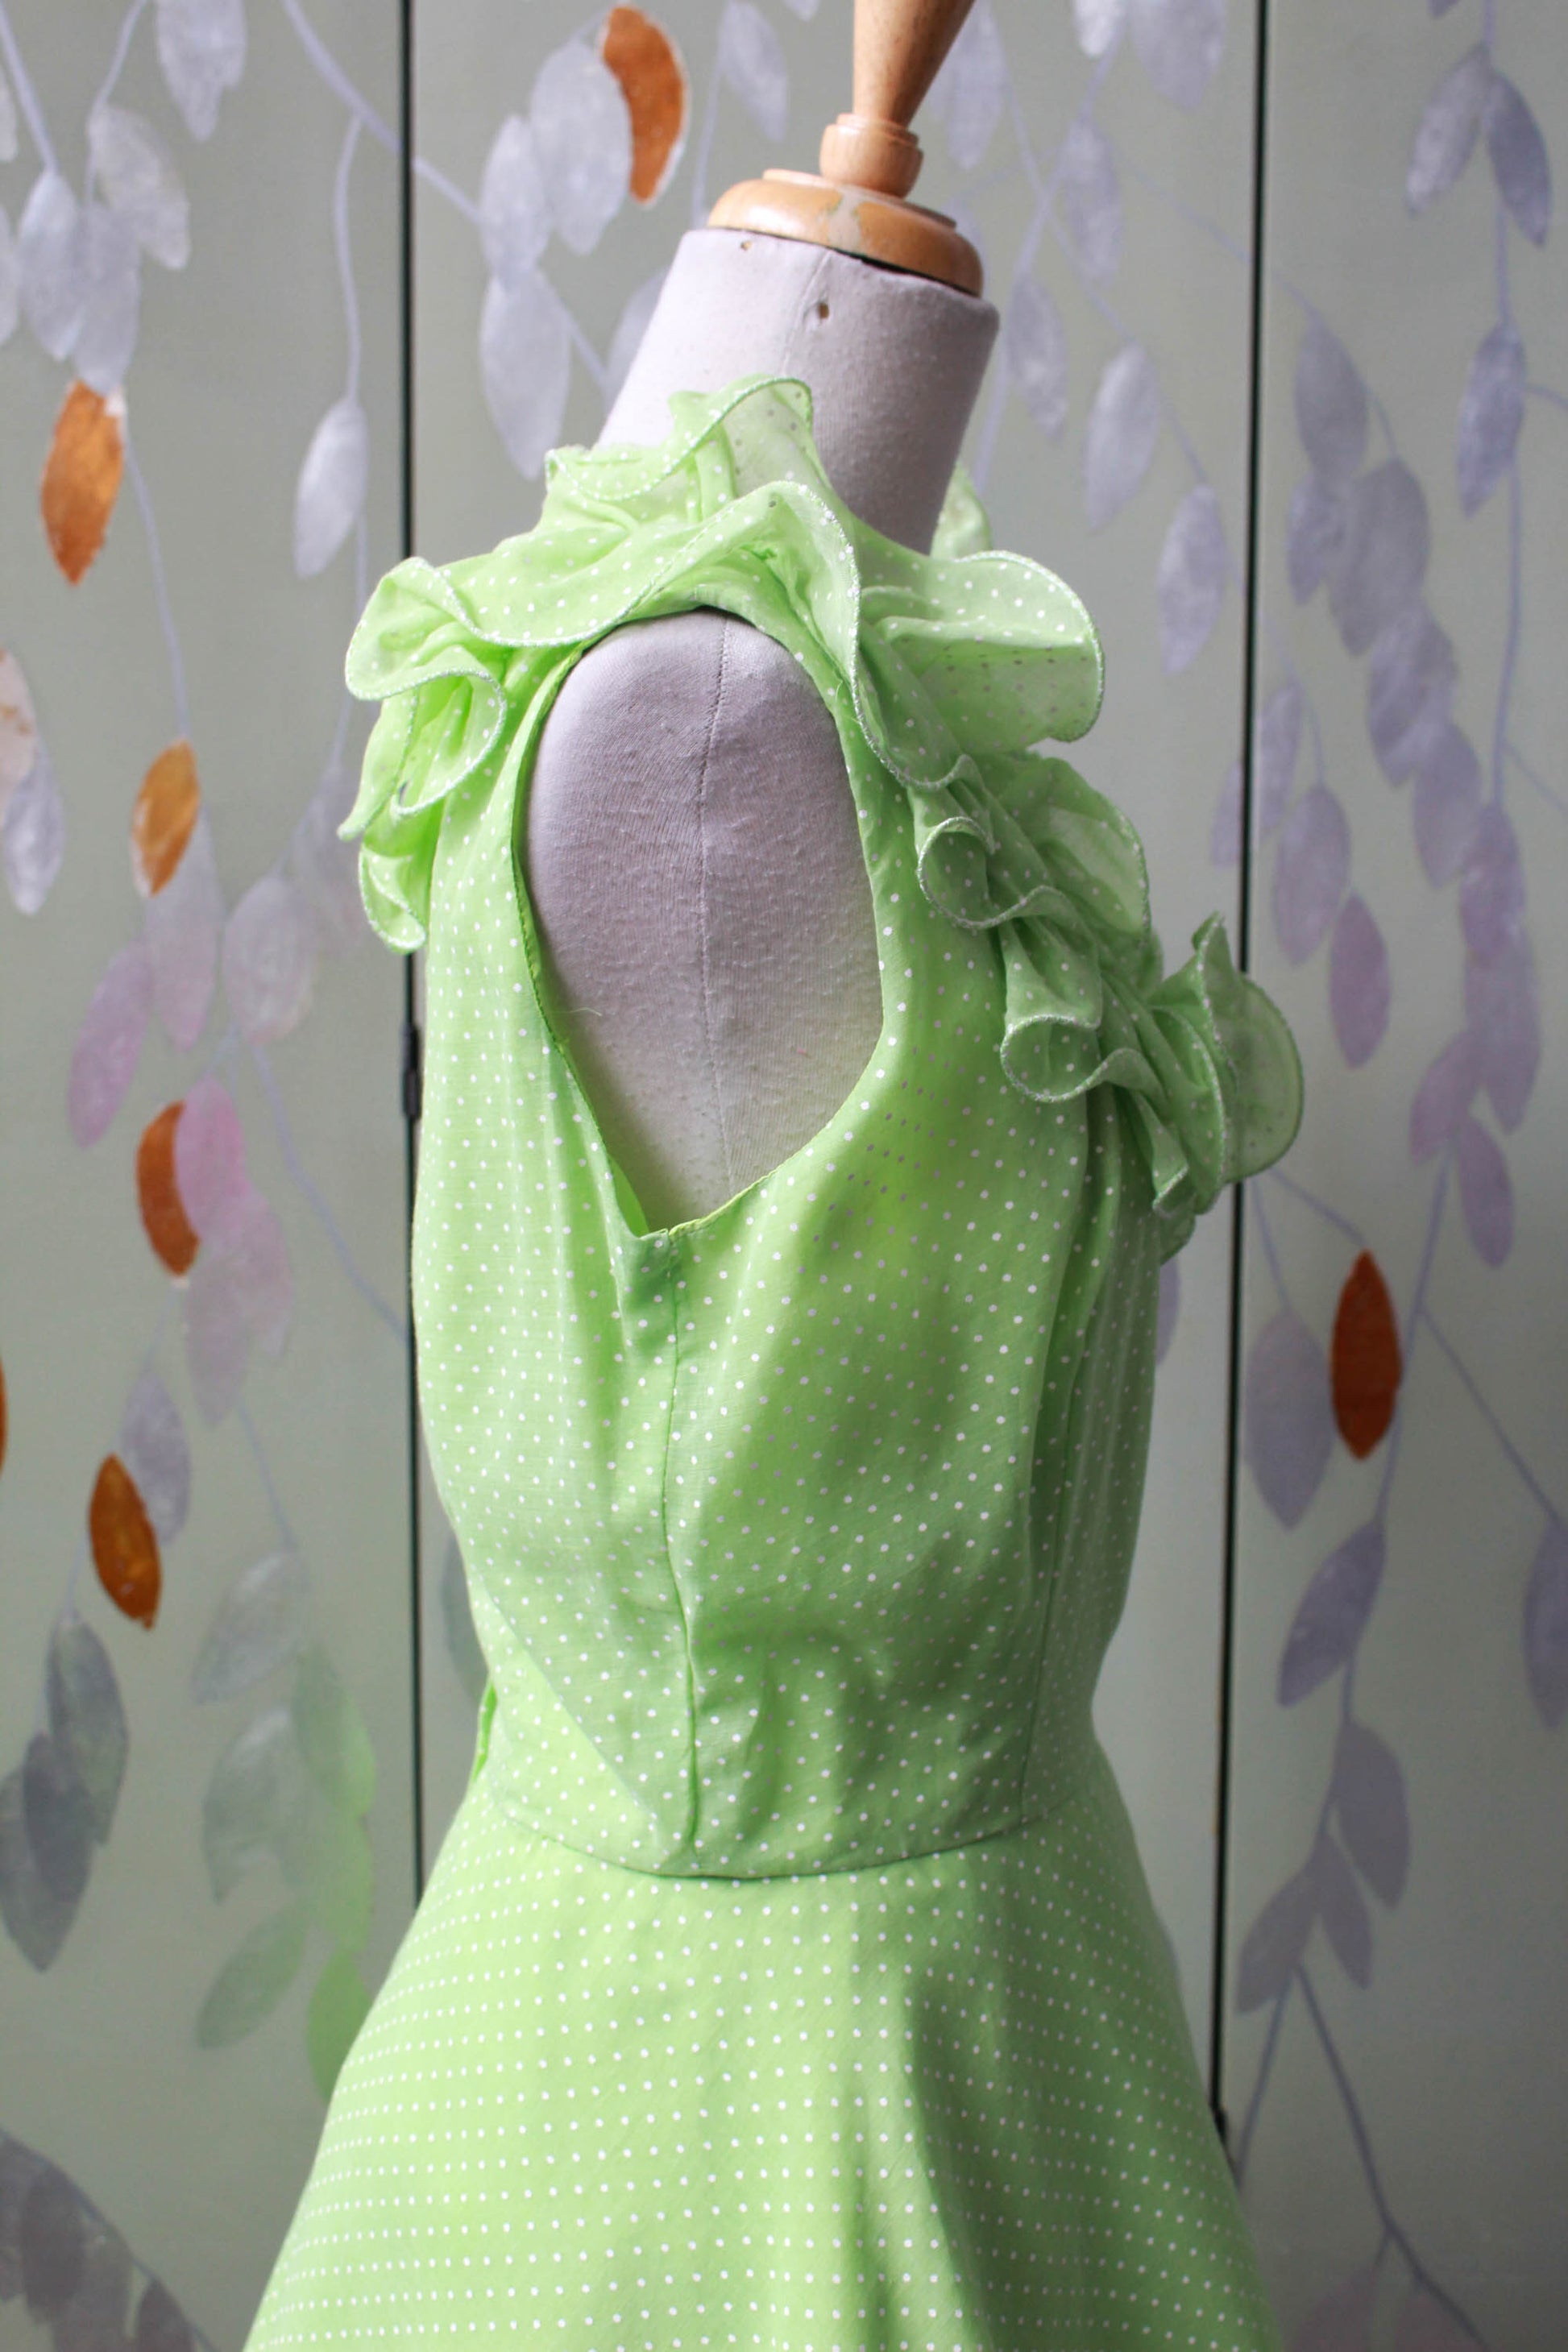 1960s lime green and white polka dot print fit and flare dress with ruffled collar, sleeveless, cotton blend summer vintage dress